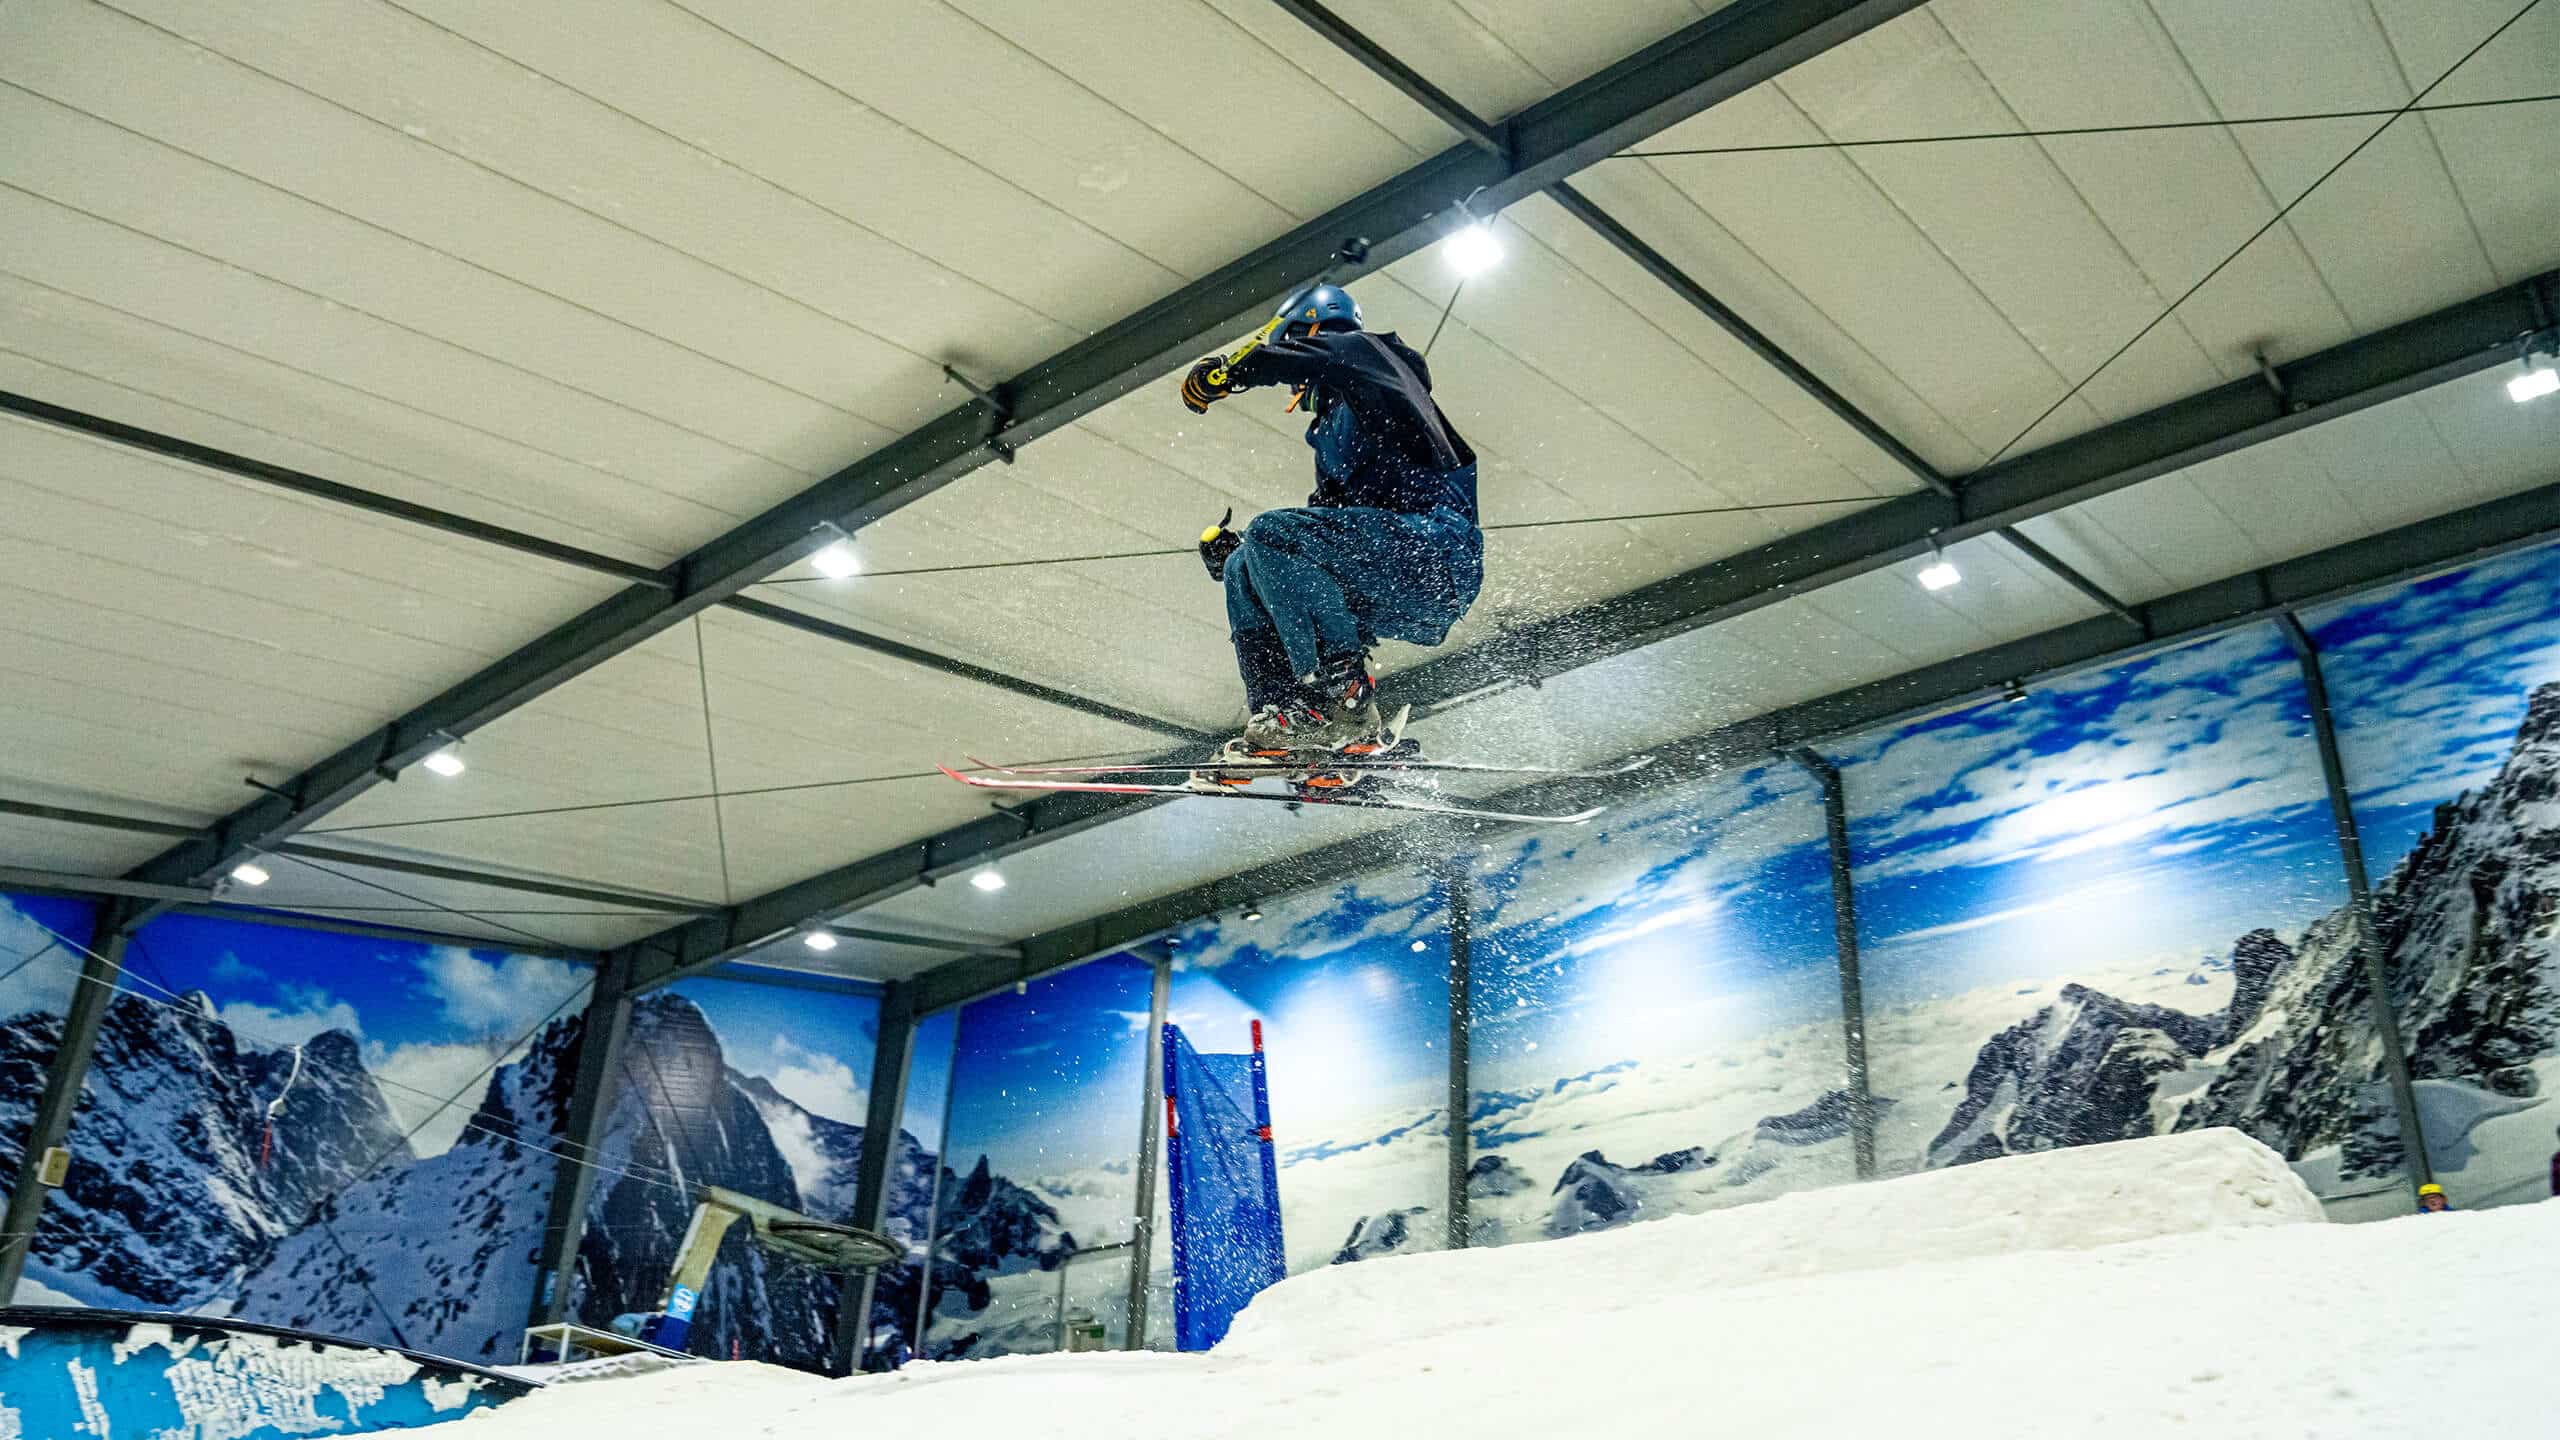 Freestyle Skier does a jump in Snowplanet Terrain Park